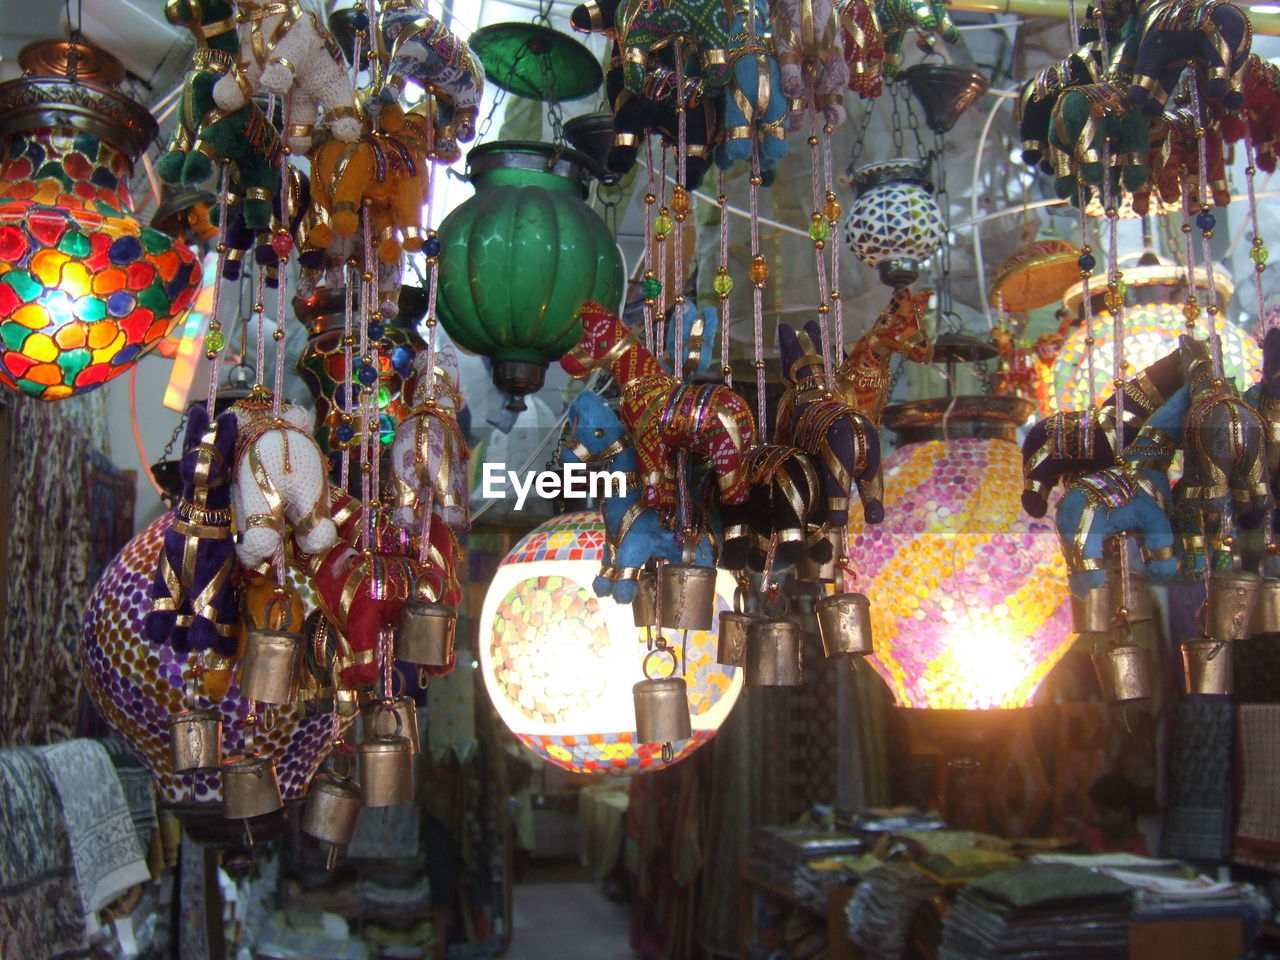 View of market stall with lanterns